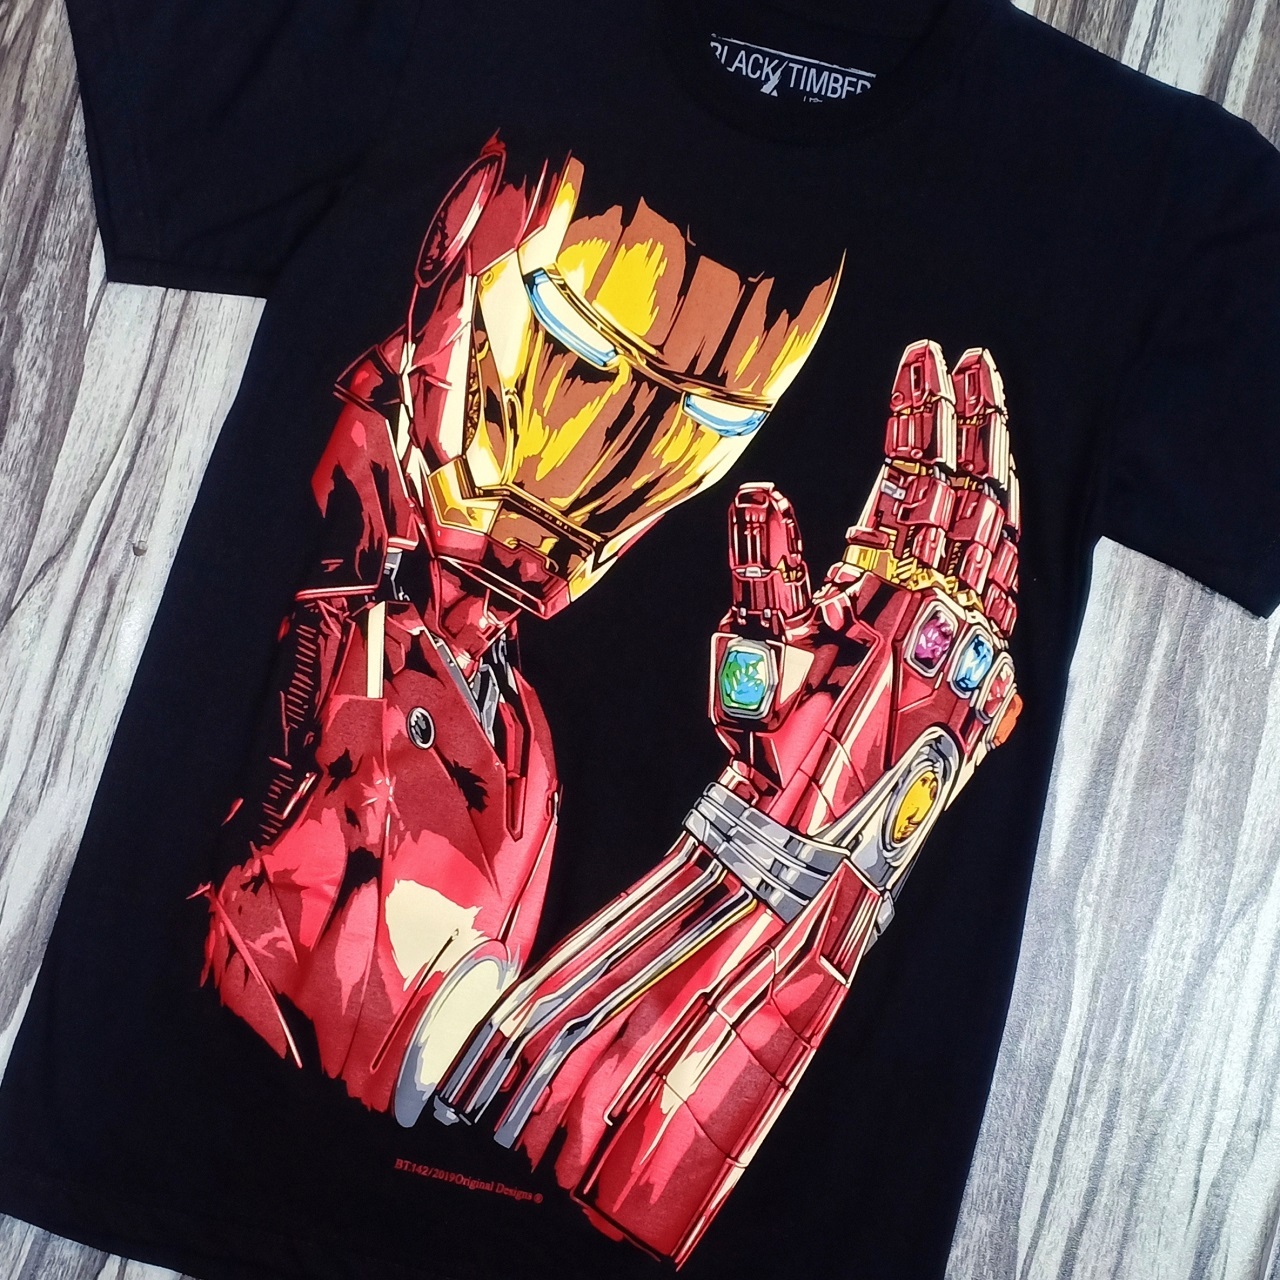 BT142 IRON MAN UNIVERSE SCREEN PREMIUM SILK COTTON QUALITY GAUNTLET SYSTEM SPEED NEW MARVEL T-SHIRT HIGH QUALITY TIMBER GAME TYPE GRADE MOAI TIMBER BLACK NANO END COLLECTABLE SILK HIGH – SCREEN BLACK